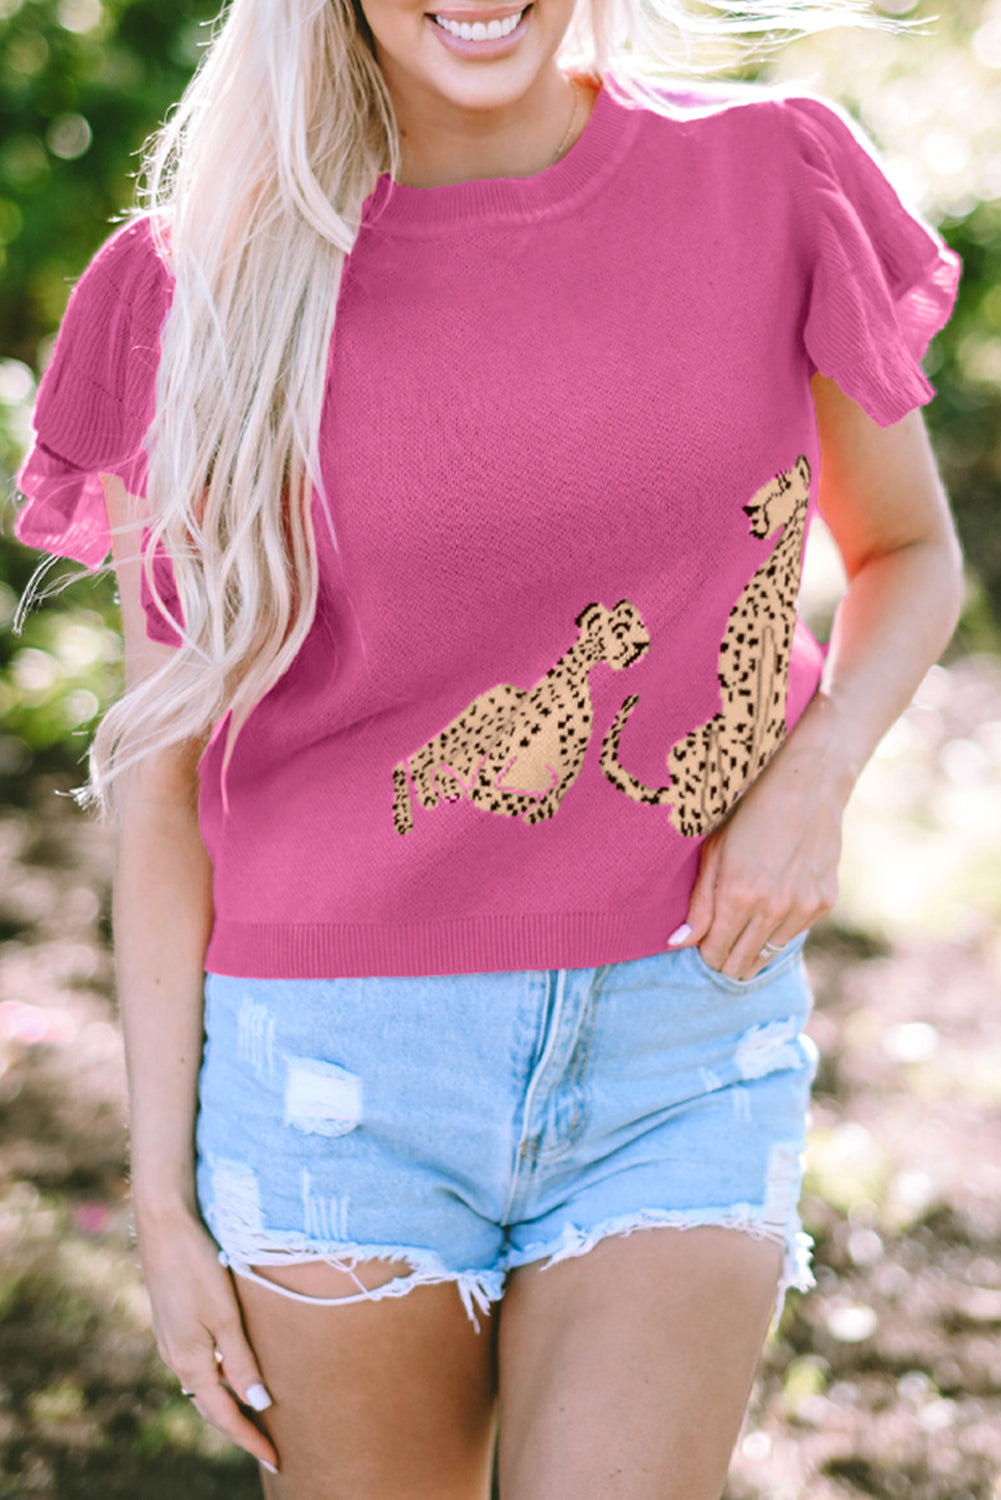 Pink Leopard Ruffled Sleeve Round Neck Knit Sweater Sweaters & Cardigans JT's Designer Fashion